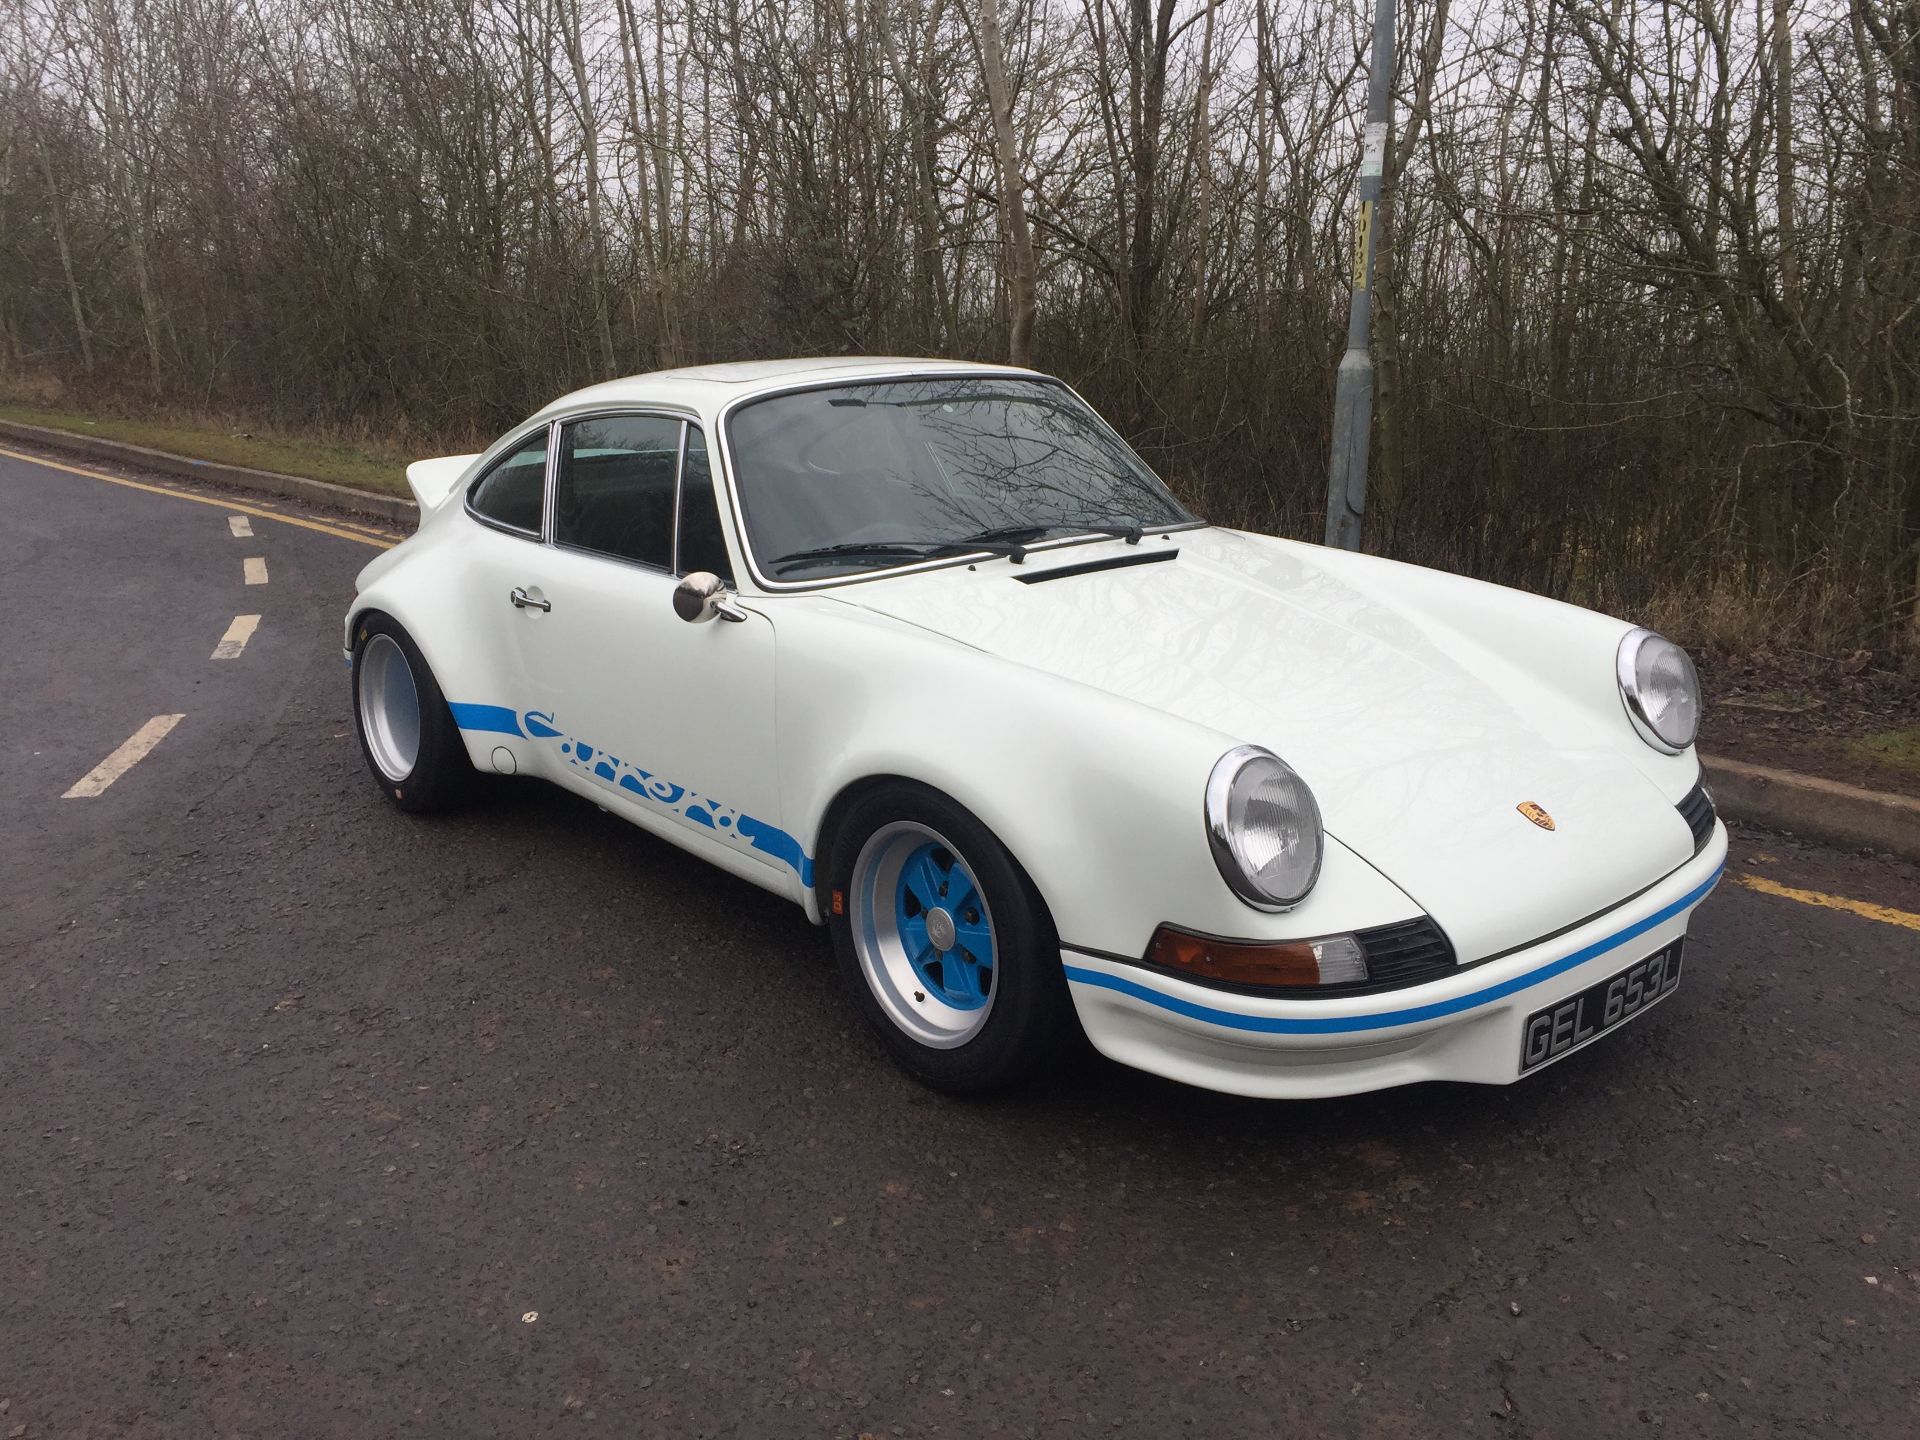 Porsche 911 Carrera 2.7 Rs Recreation - Pro 9 Build Based On A 1986 Porsche 911 **Reserve reduced** - Image 11 of 21